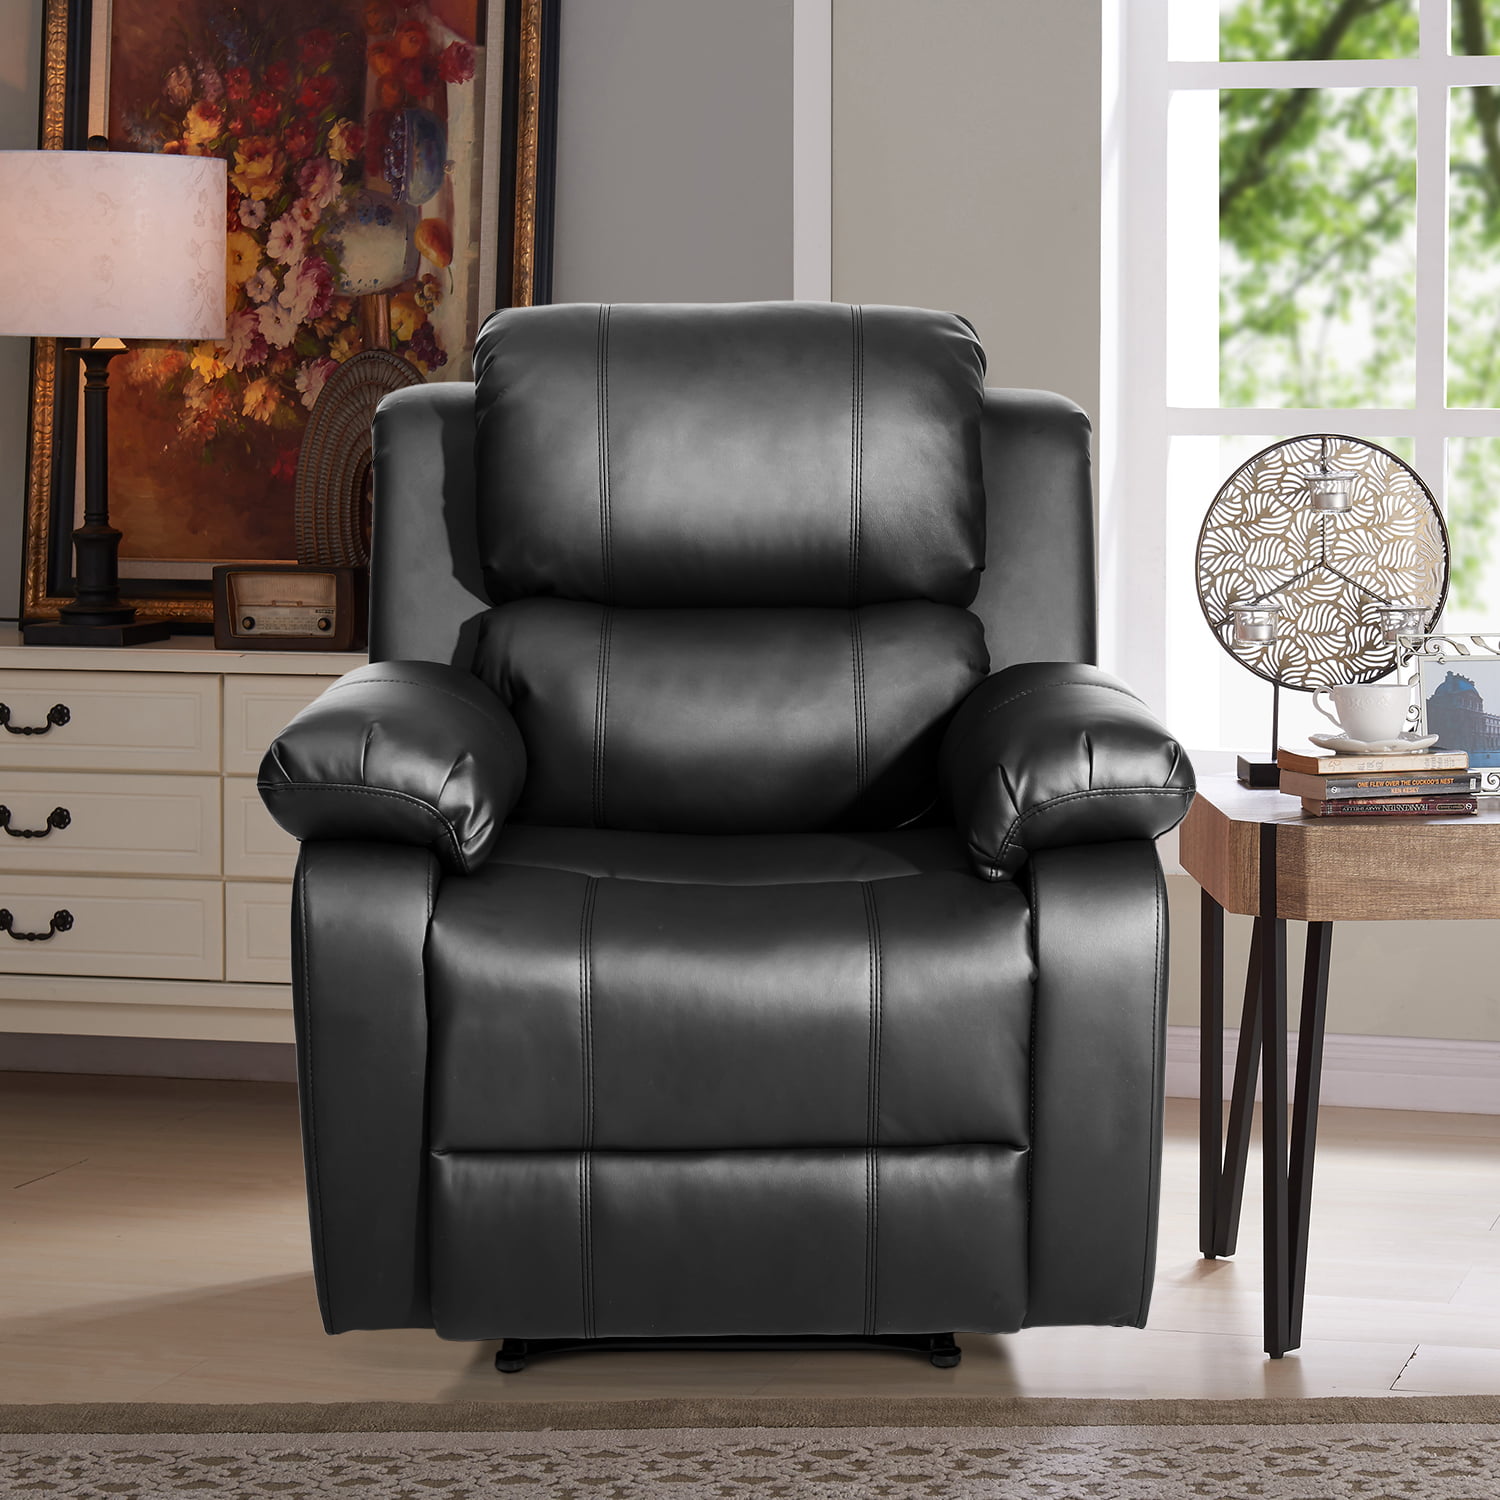 Details about   Swivel PU Leather Recliner Armchair Lounge Sofa Reclining Office Seat Game Chair 